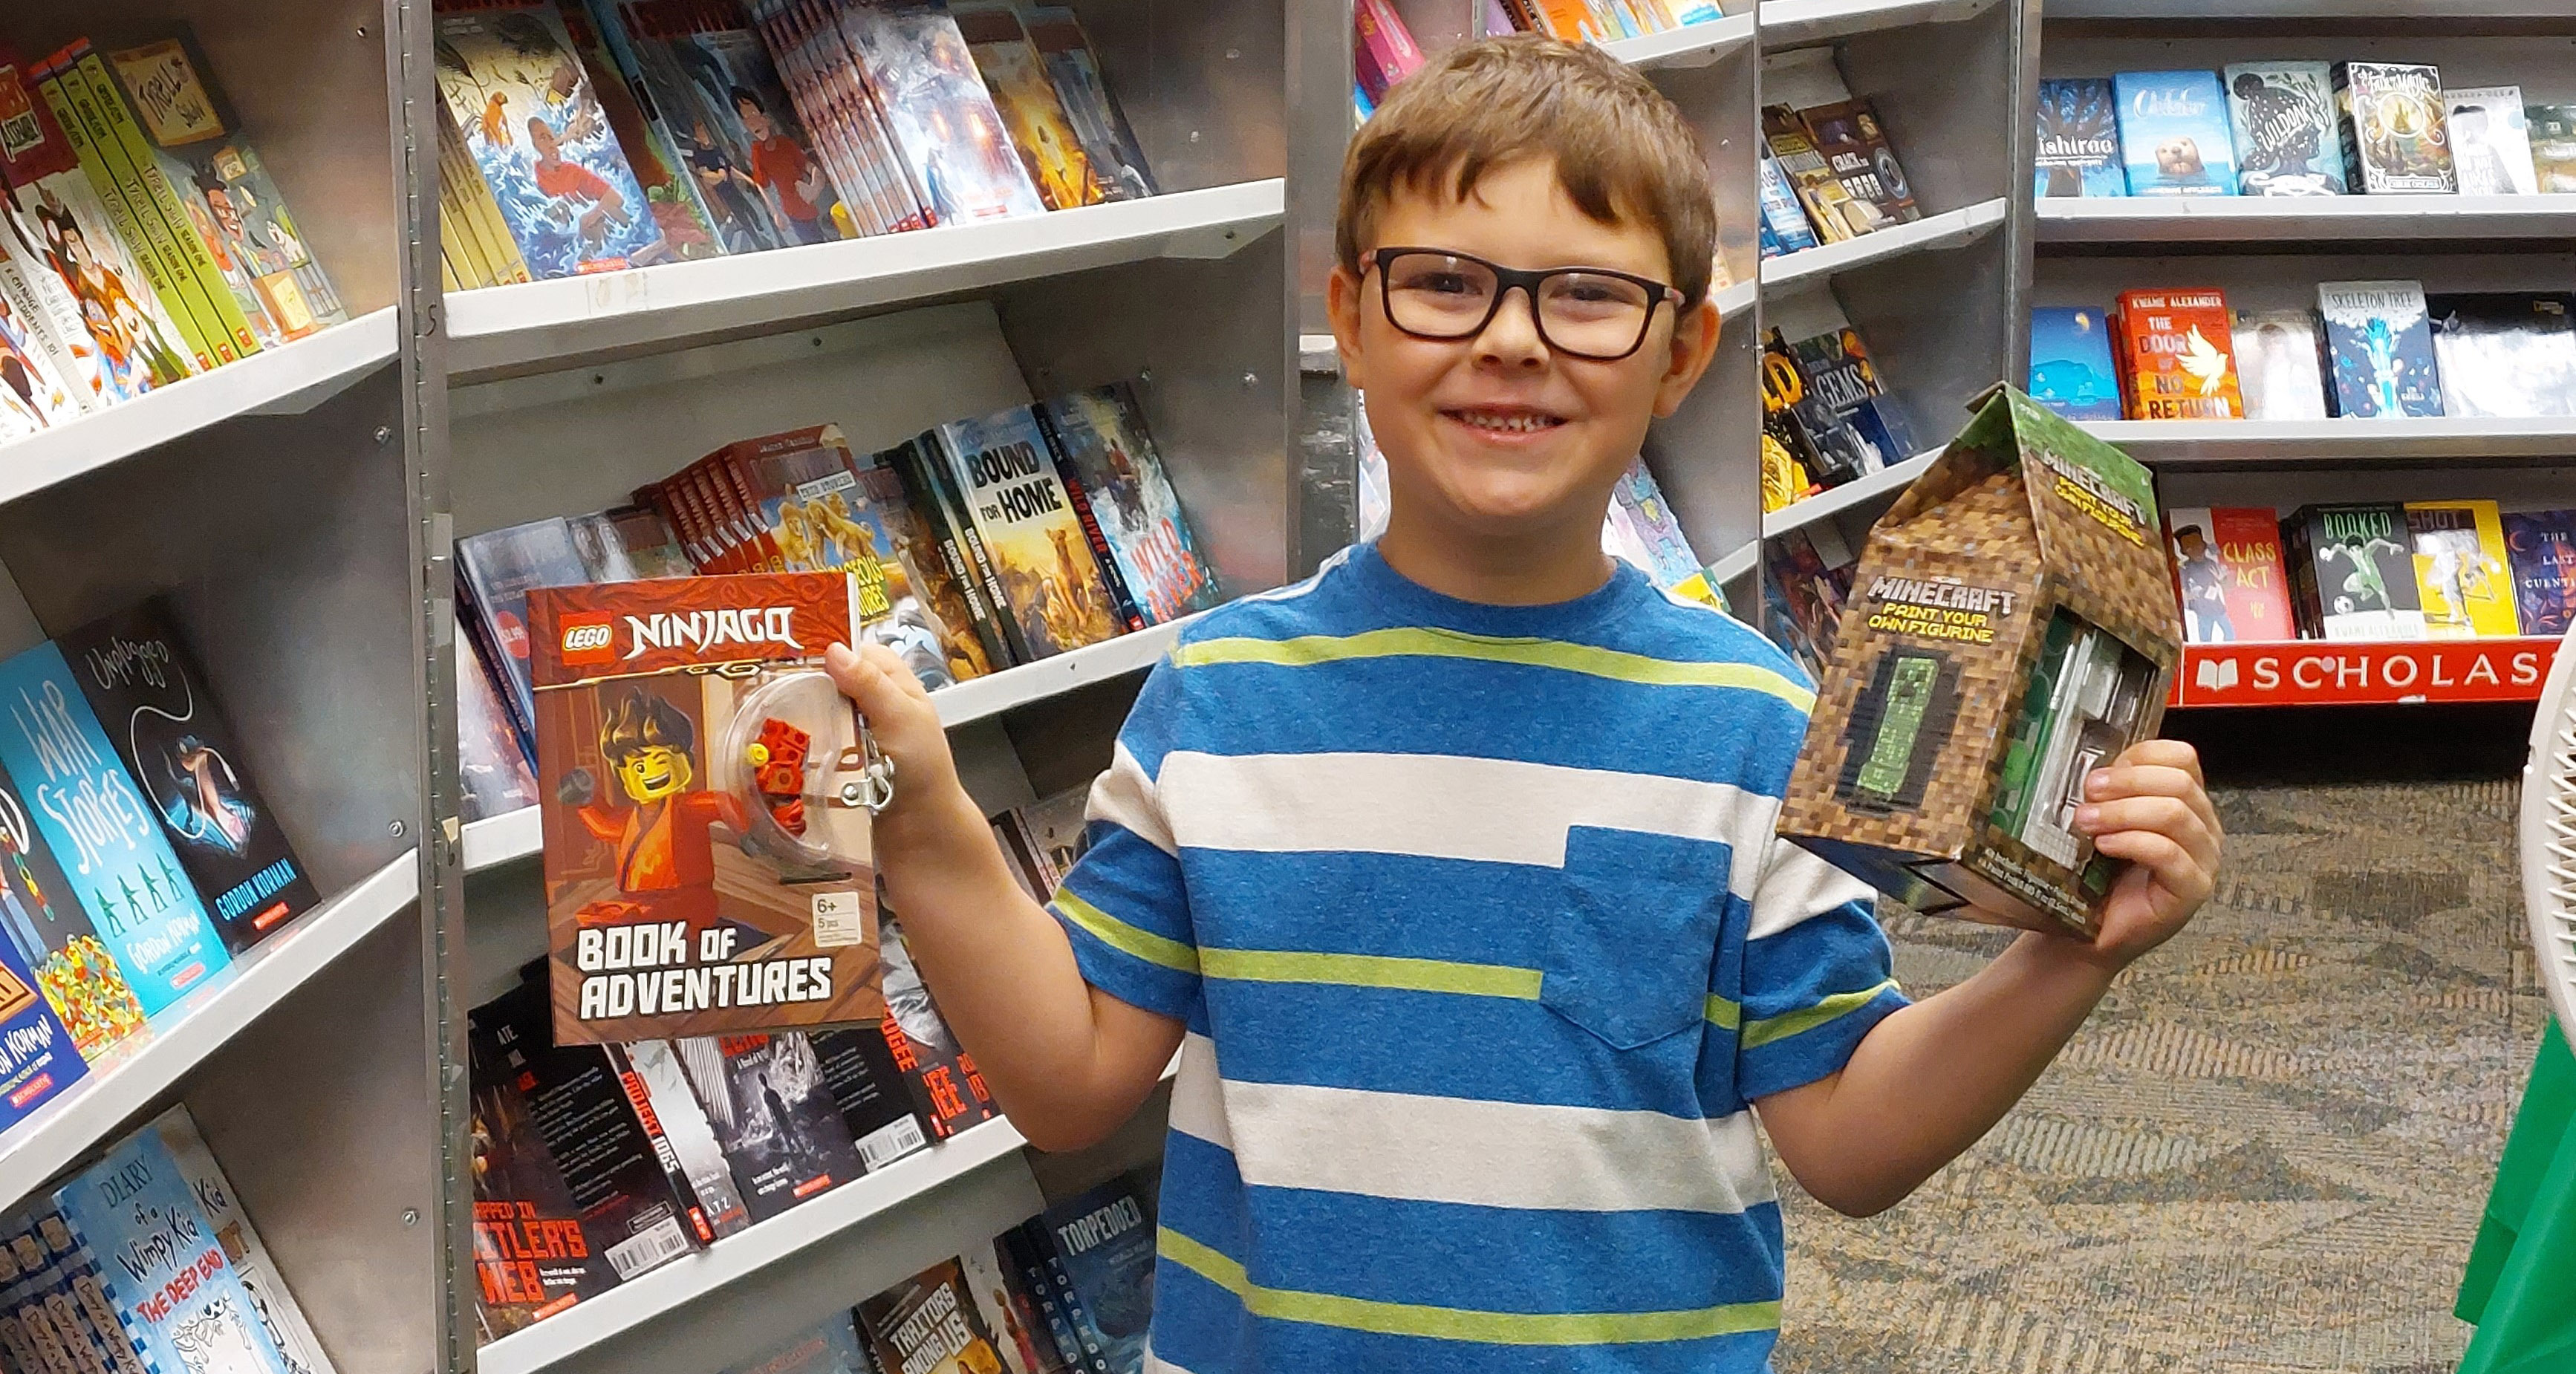 A boy holding up two books in the school library